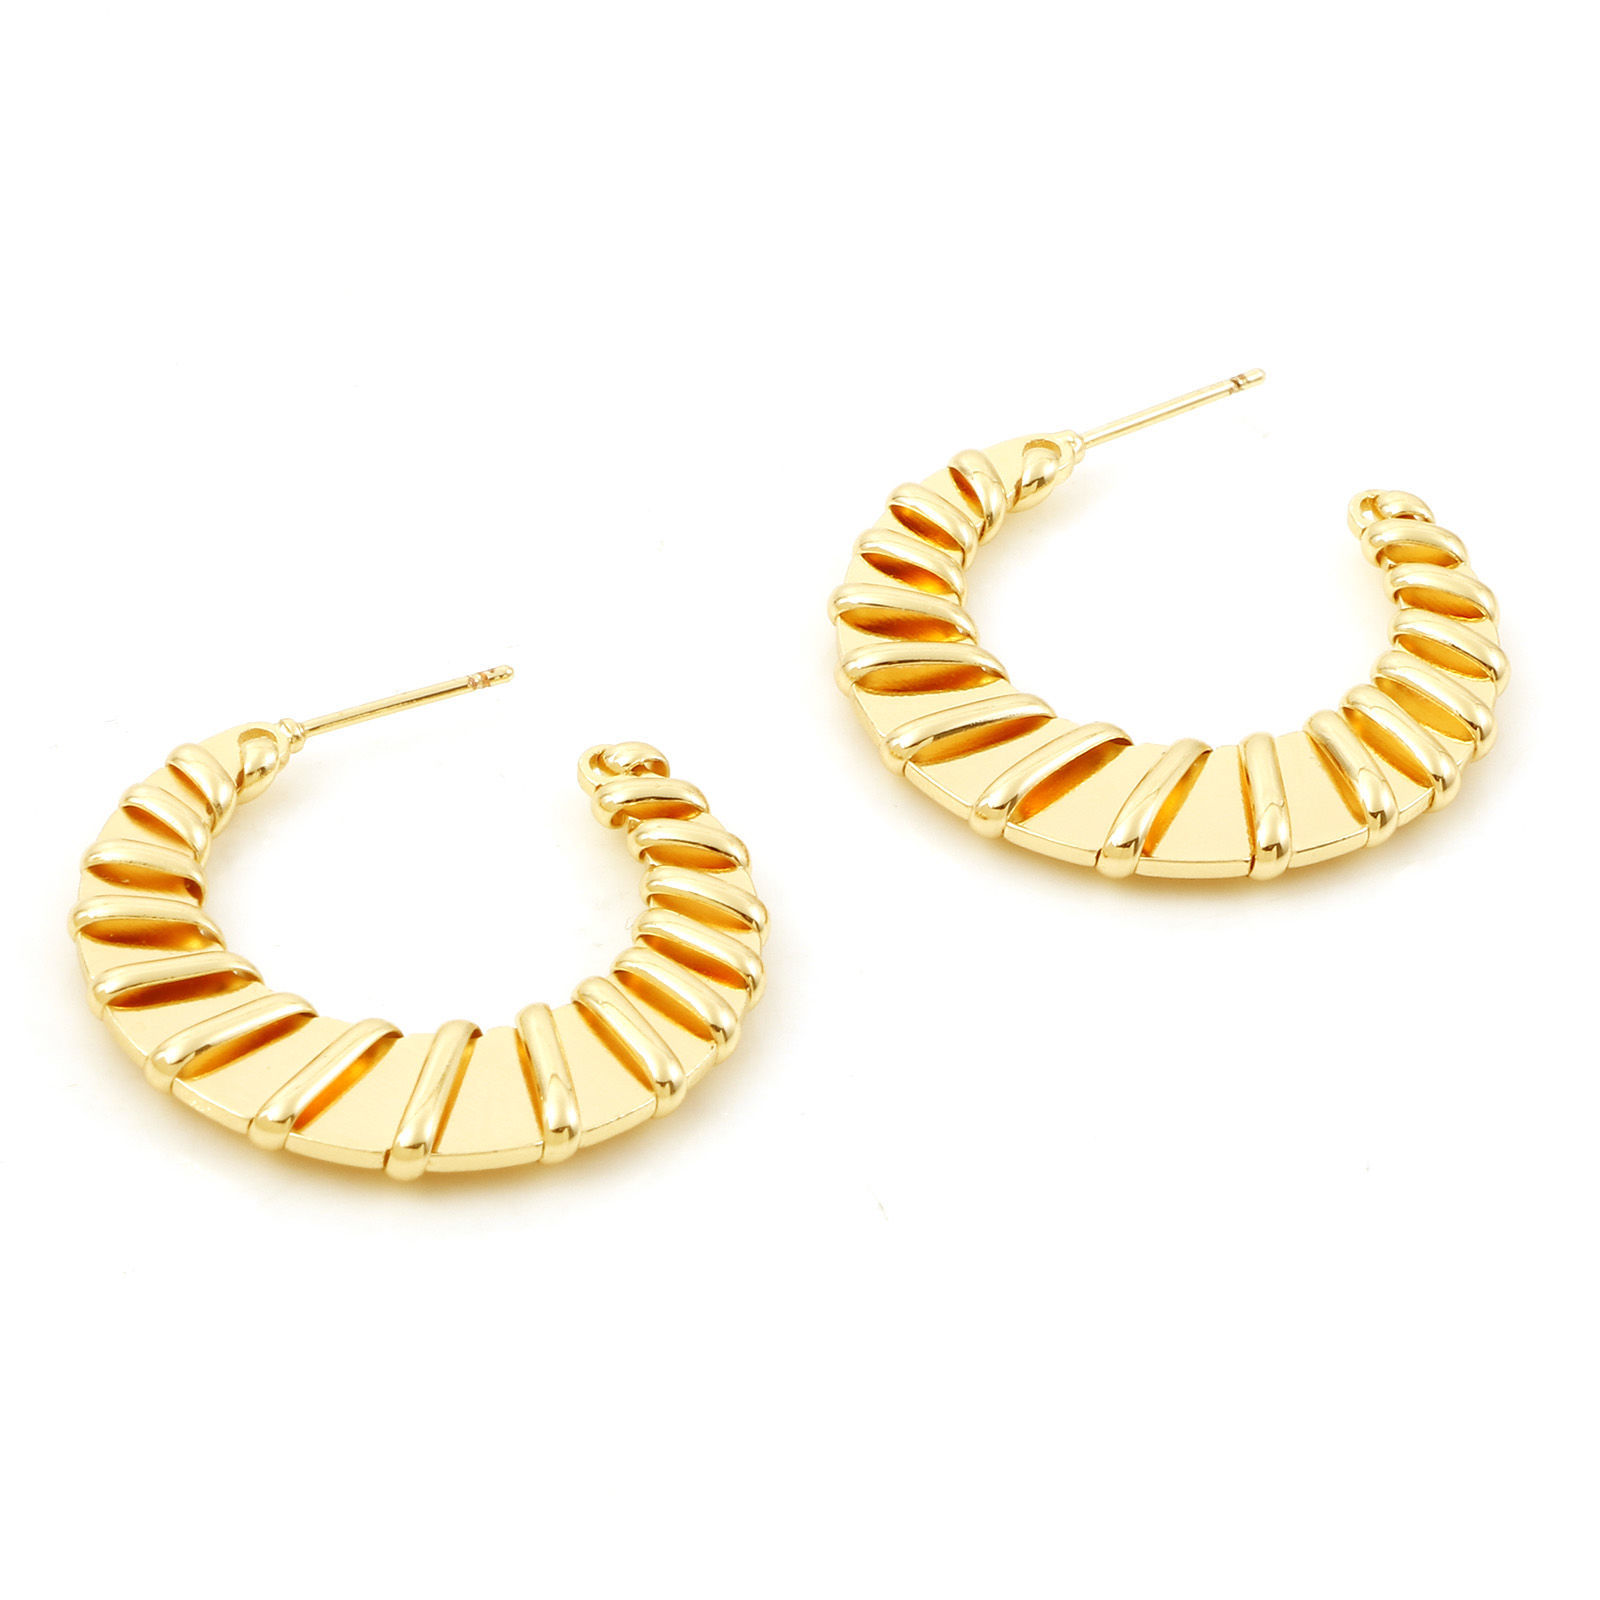 Picture of Copper Stylish Hoop Earrings Real Gold Plated C Shape 3.1cm x 3cm, Post/ Wire Size: (21 gauge), 30 PCs